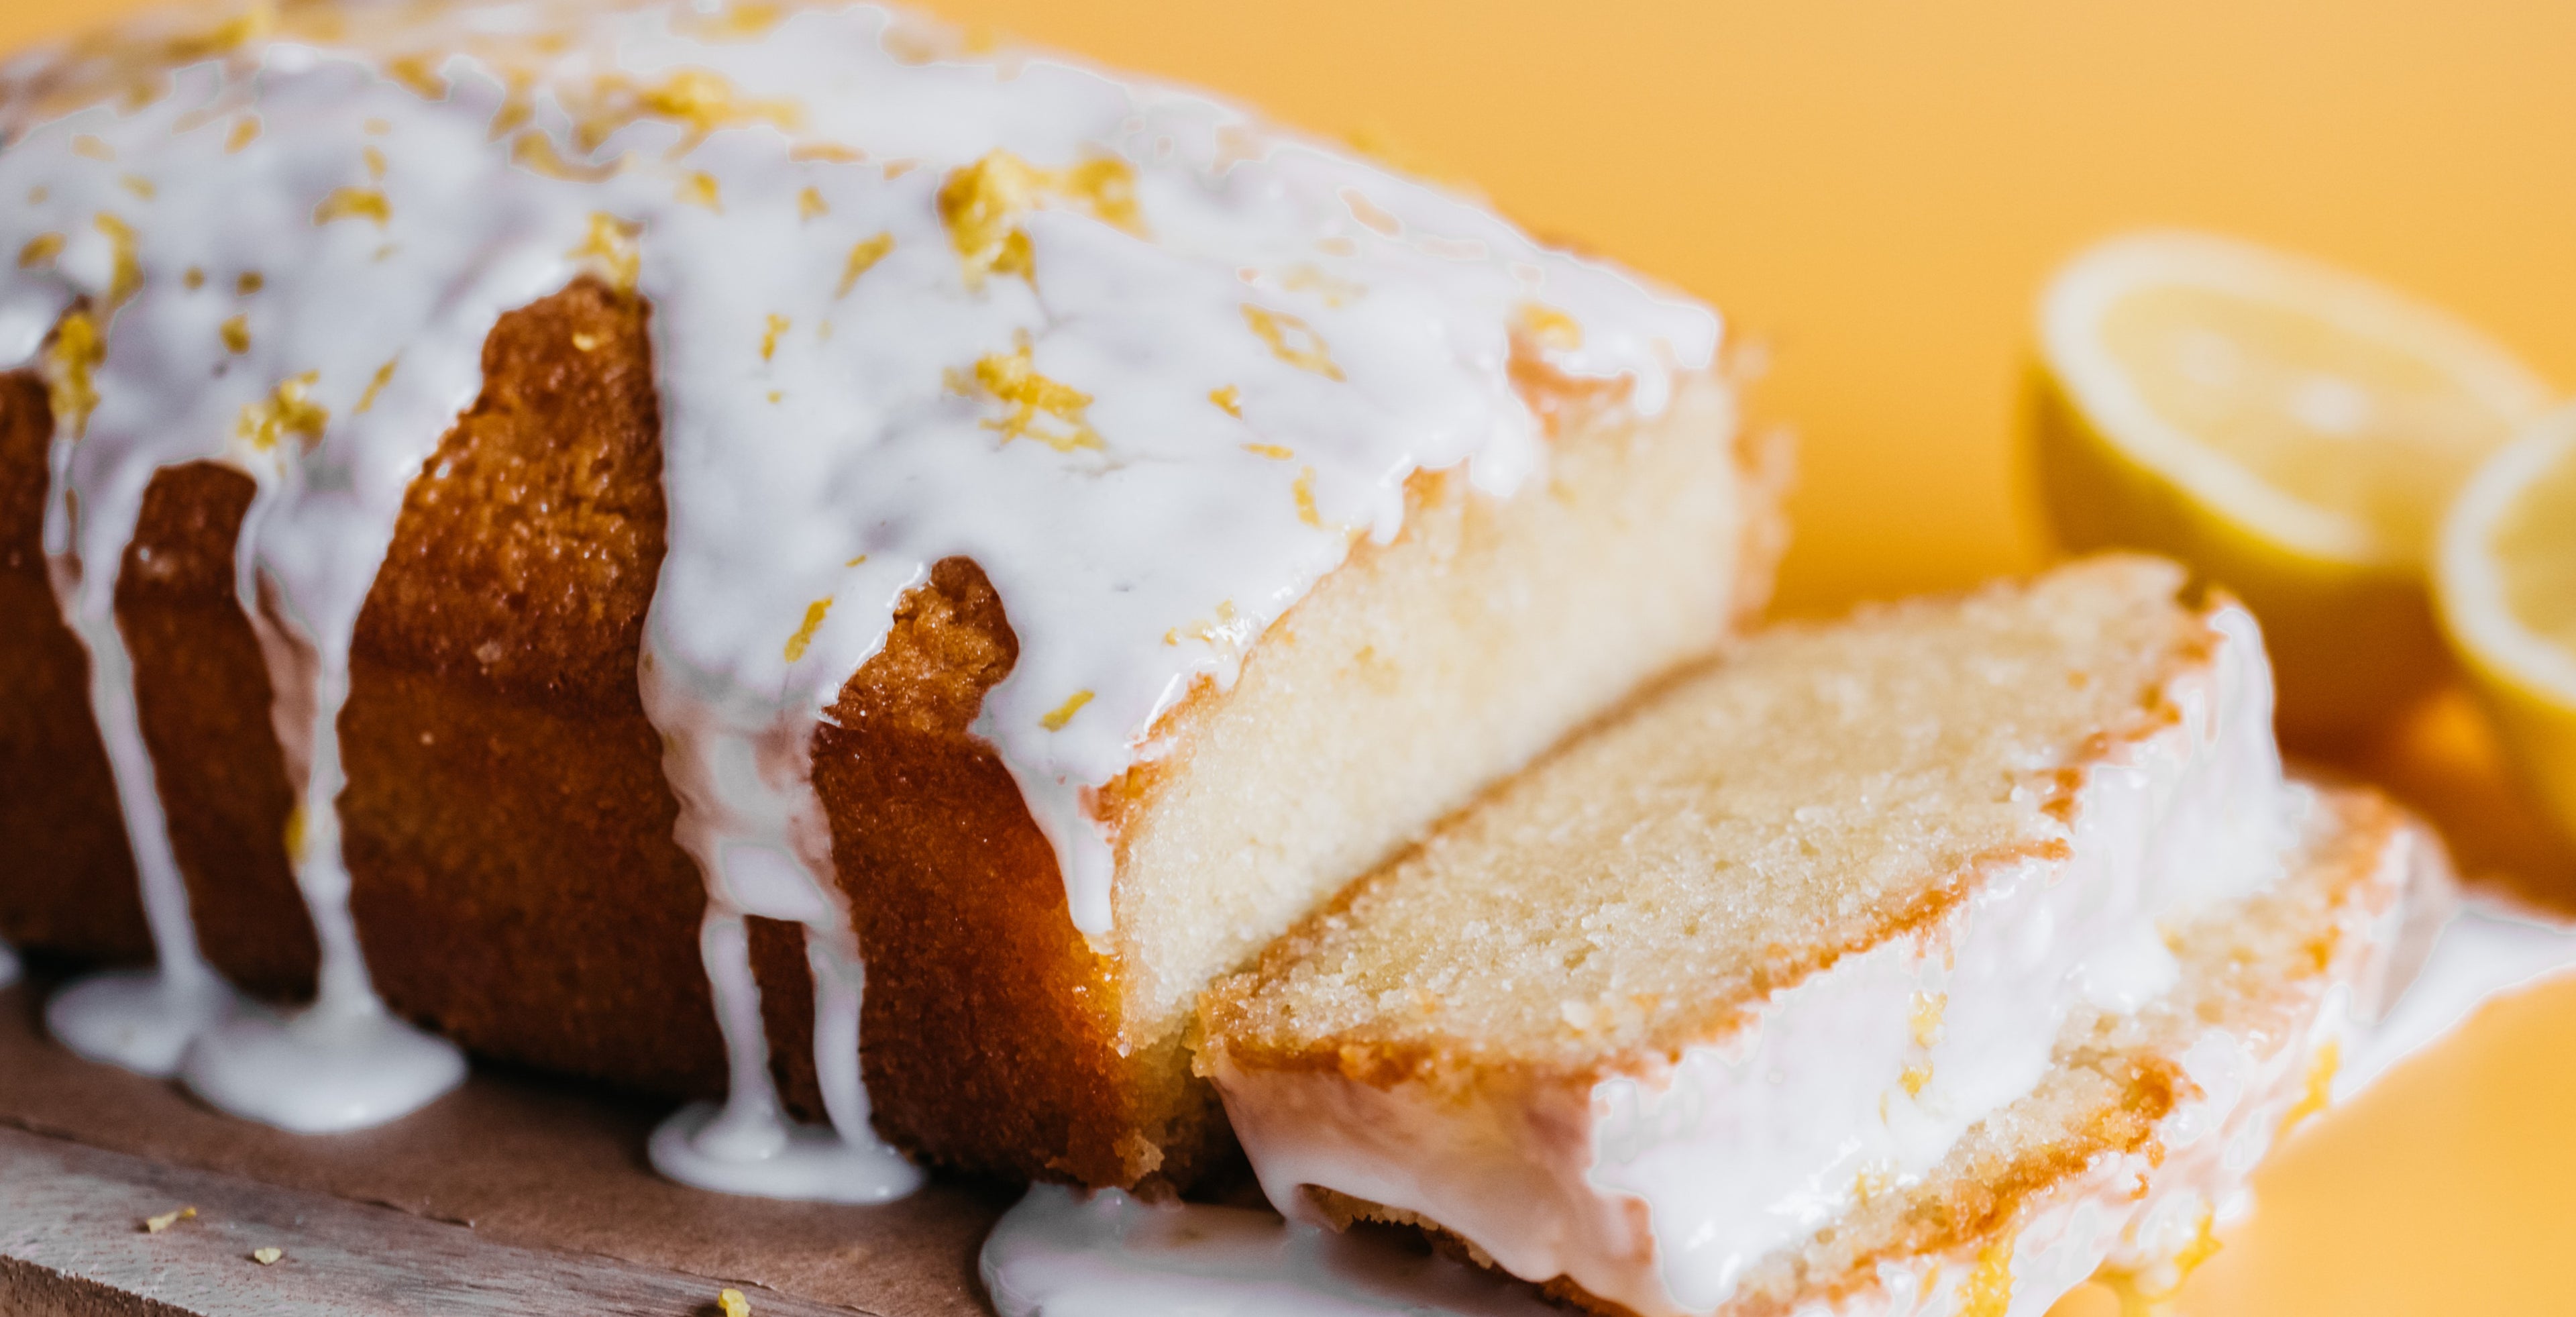 Homemade lemon drizzle cake with white lemon-flavoured icing drizzled over the top